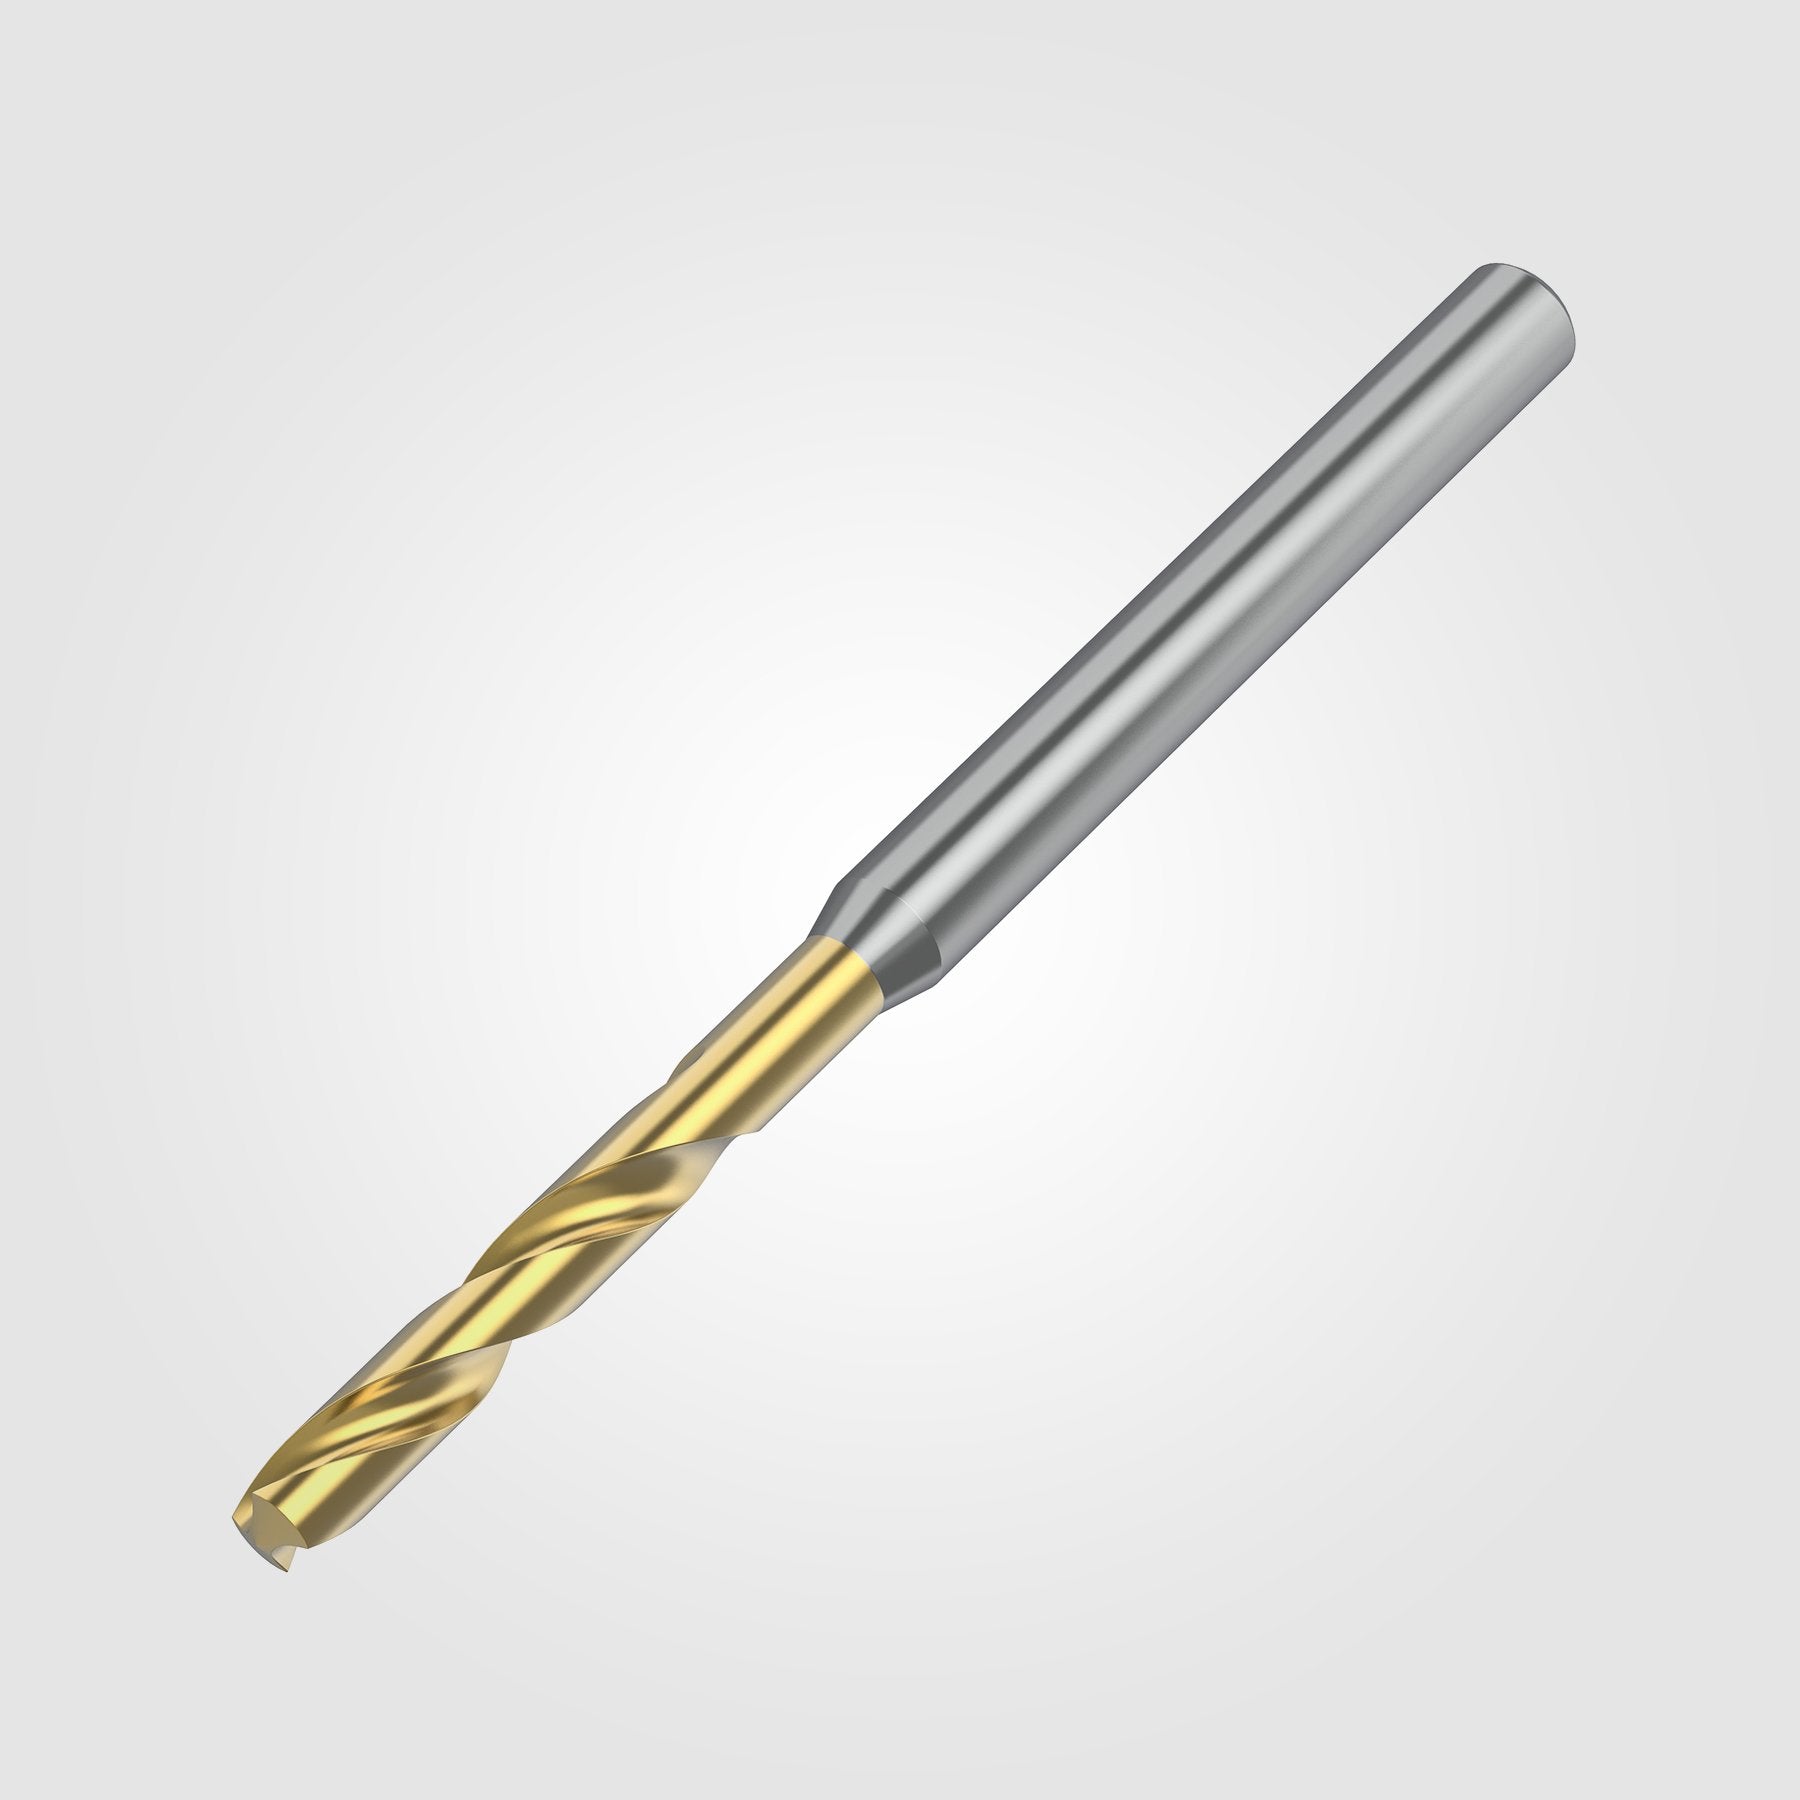 GOdrill (THROUGH COOLANT) | 10.716mm / .4219" / 3xD | SOLID CARBIDE DRILL | 4151213